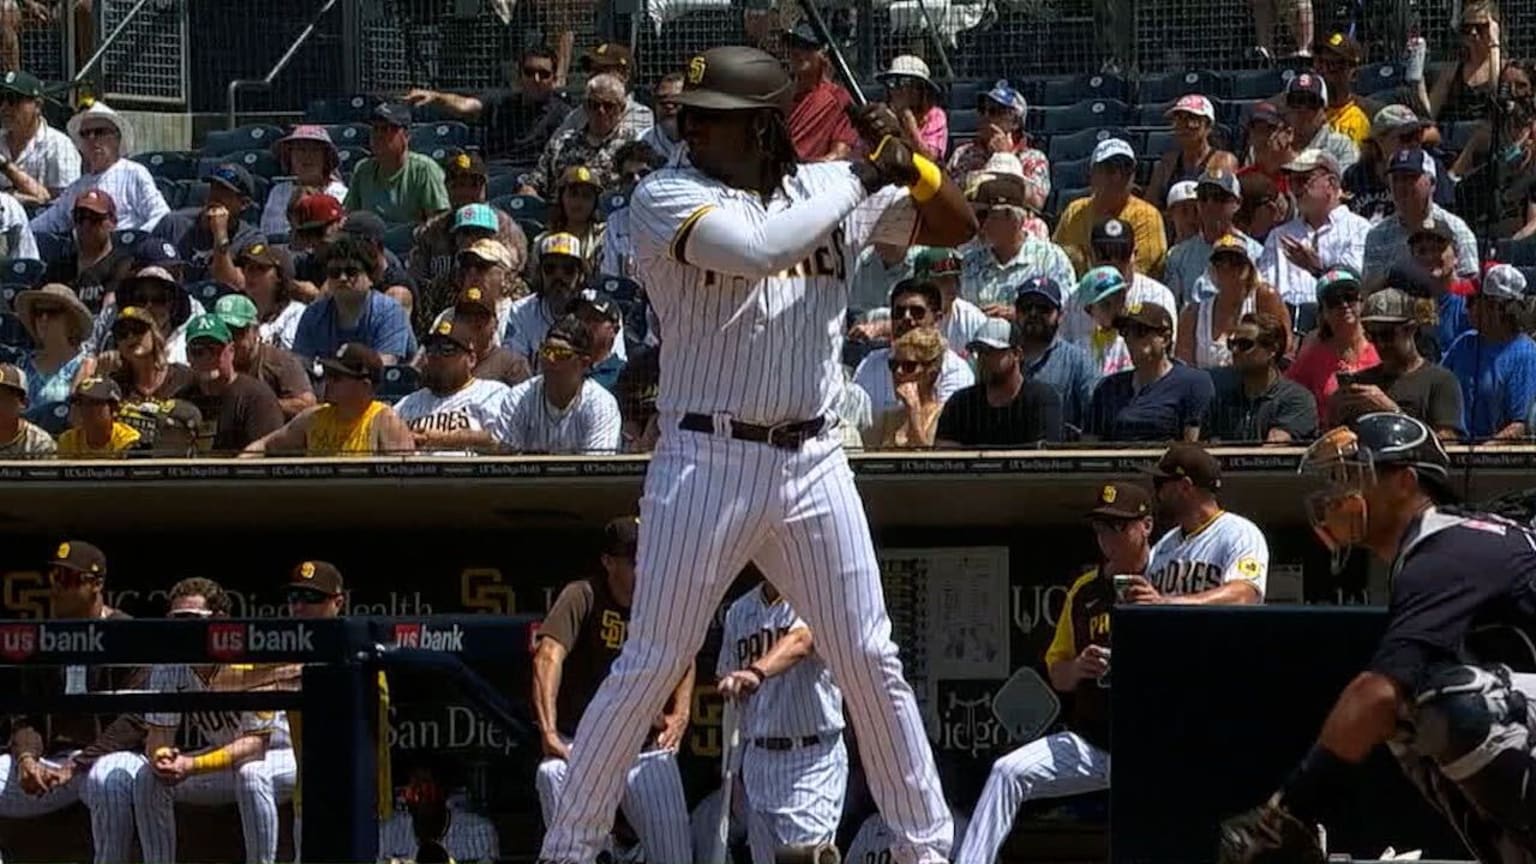 Cleveland Guardians Josh Bell corrects launch angle, heats up